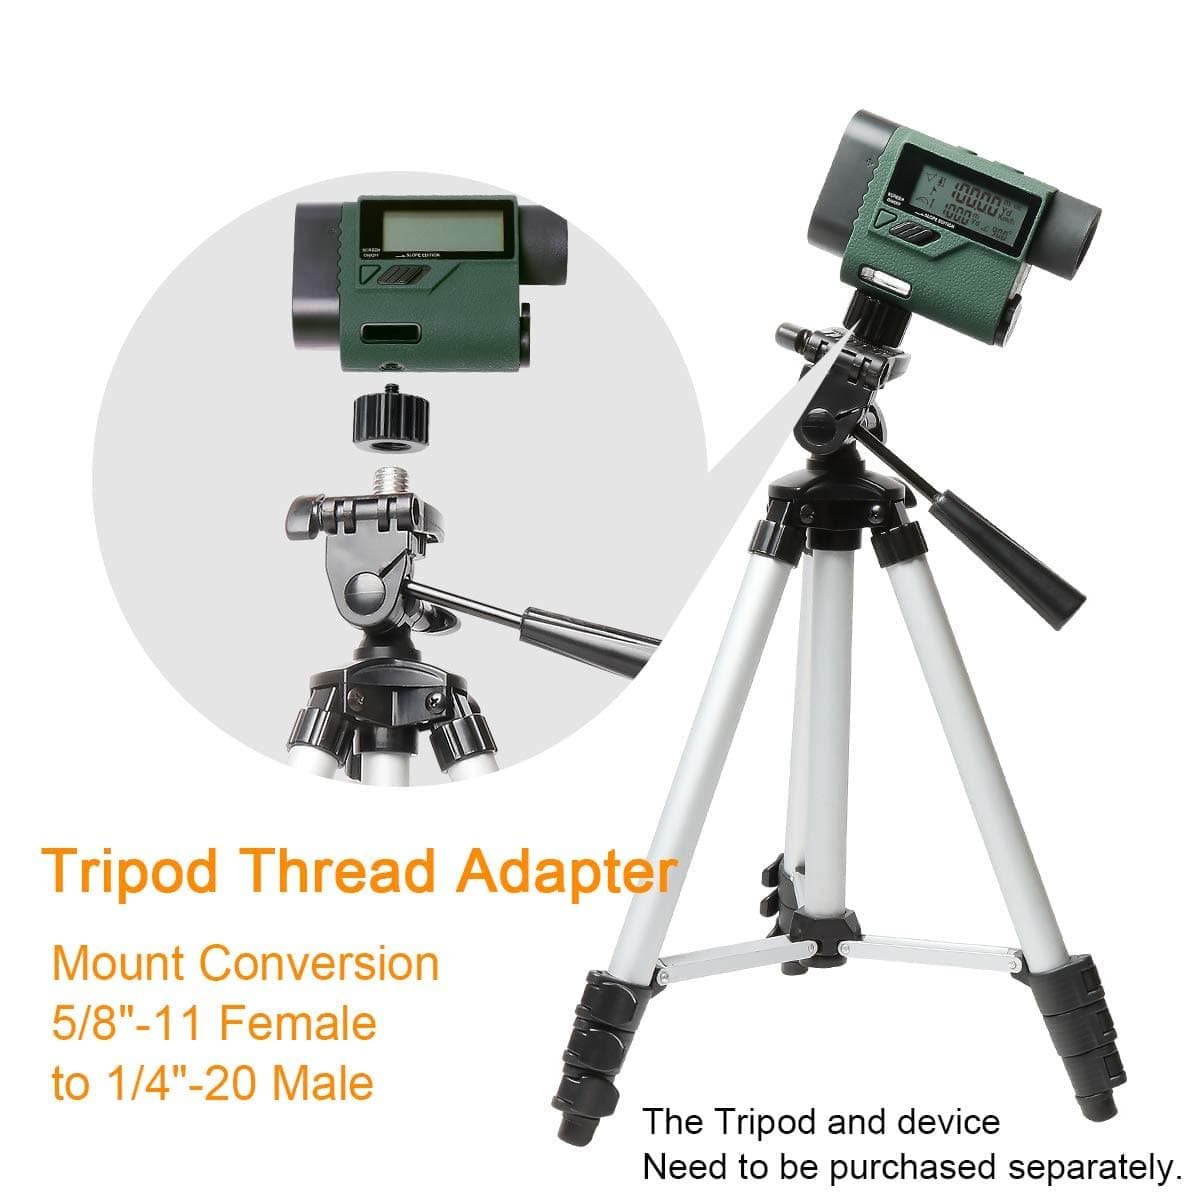 HUEPAR Adapter with 5/8-inch to 11 Female to 1/4-inch to 20 Male thread conversion for tripods and lasers, free shipping in the US1